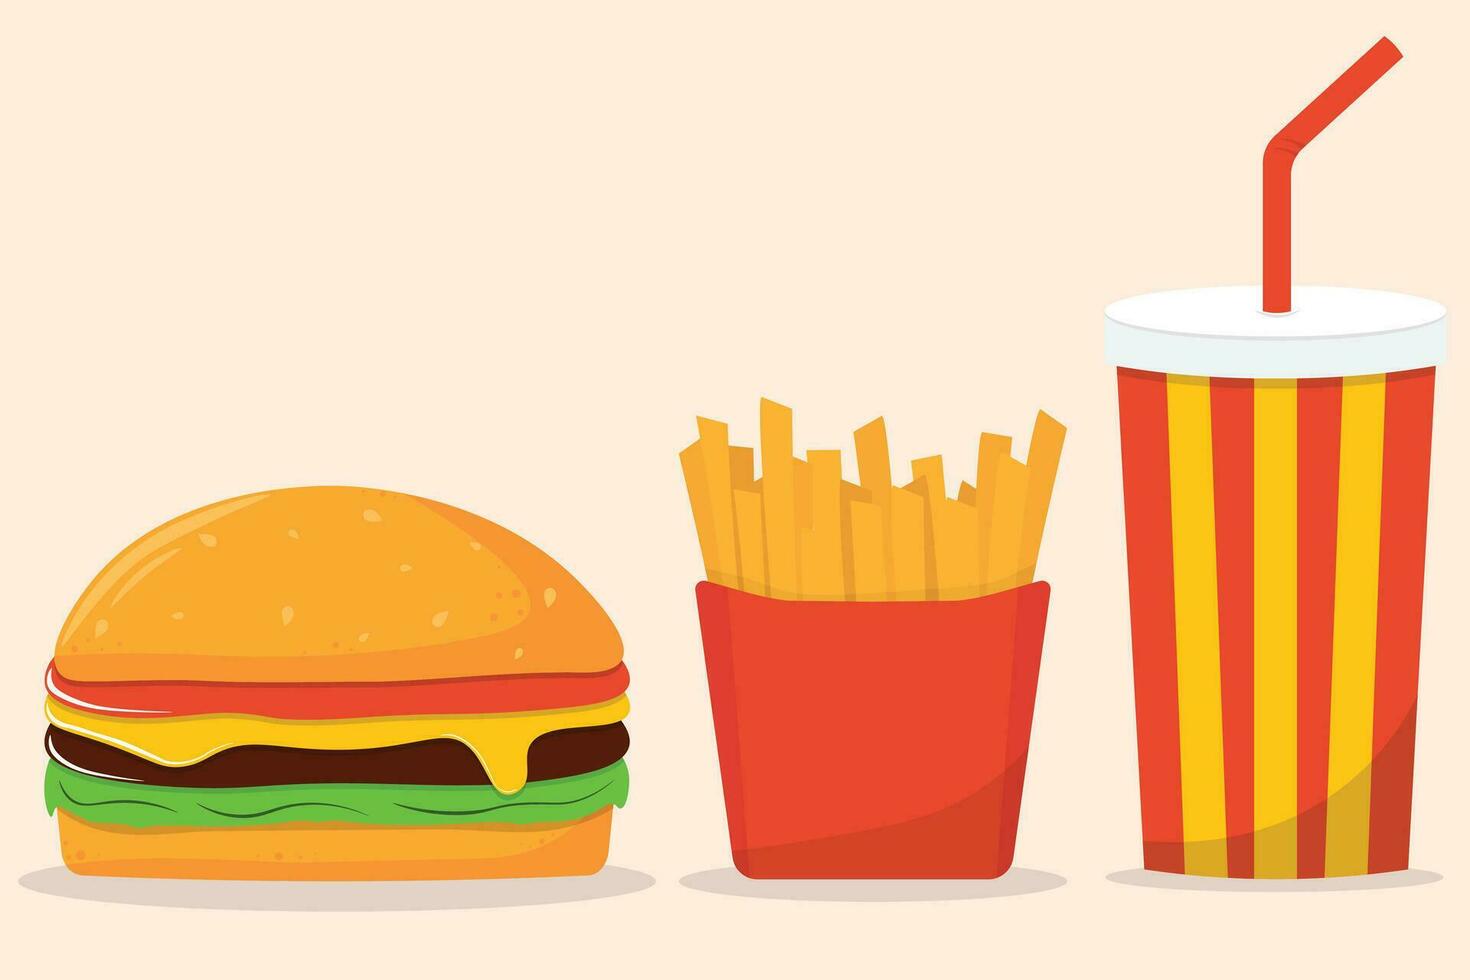 French fries potato in a paper wrapper box. Burger. Soda drink glass with straw. Fried potatoes. Icon set. Movie Cinema icon set. Fast food menu. Flat design vector